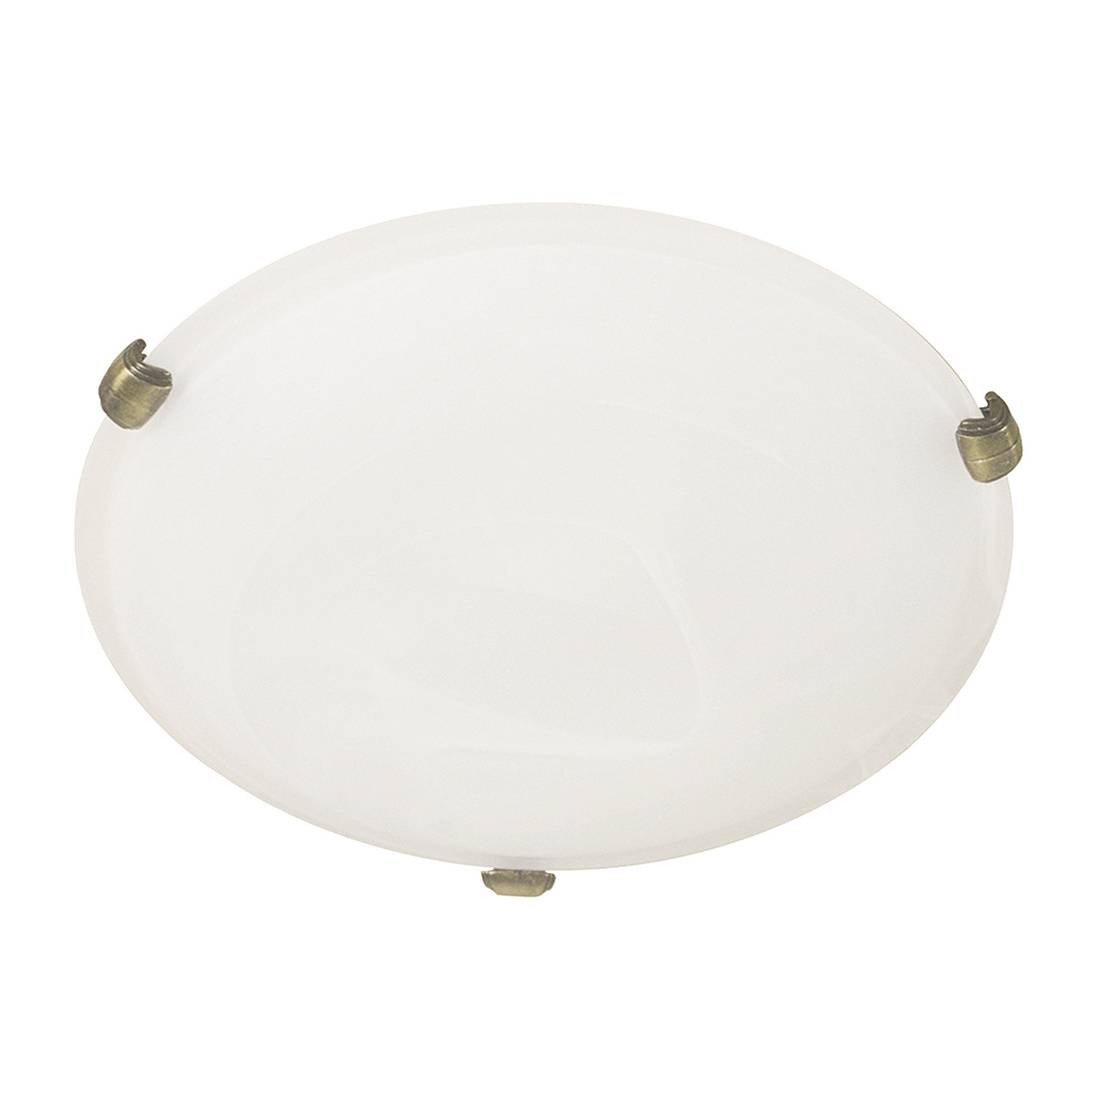 Steinhauer Lampe Ceiling and Wall 2361BR online kopen